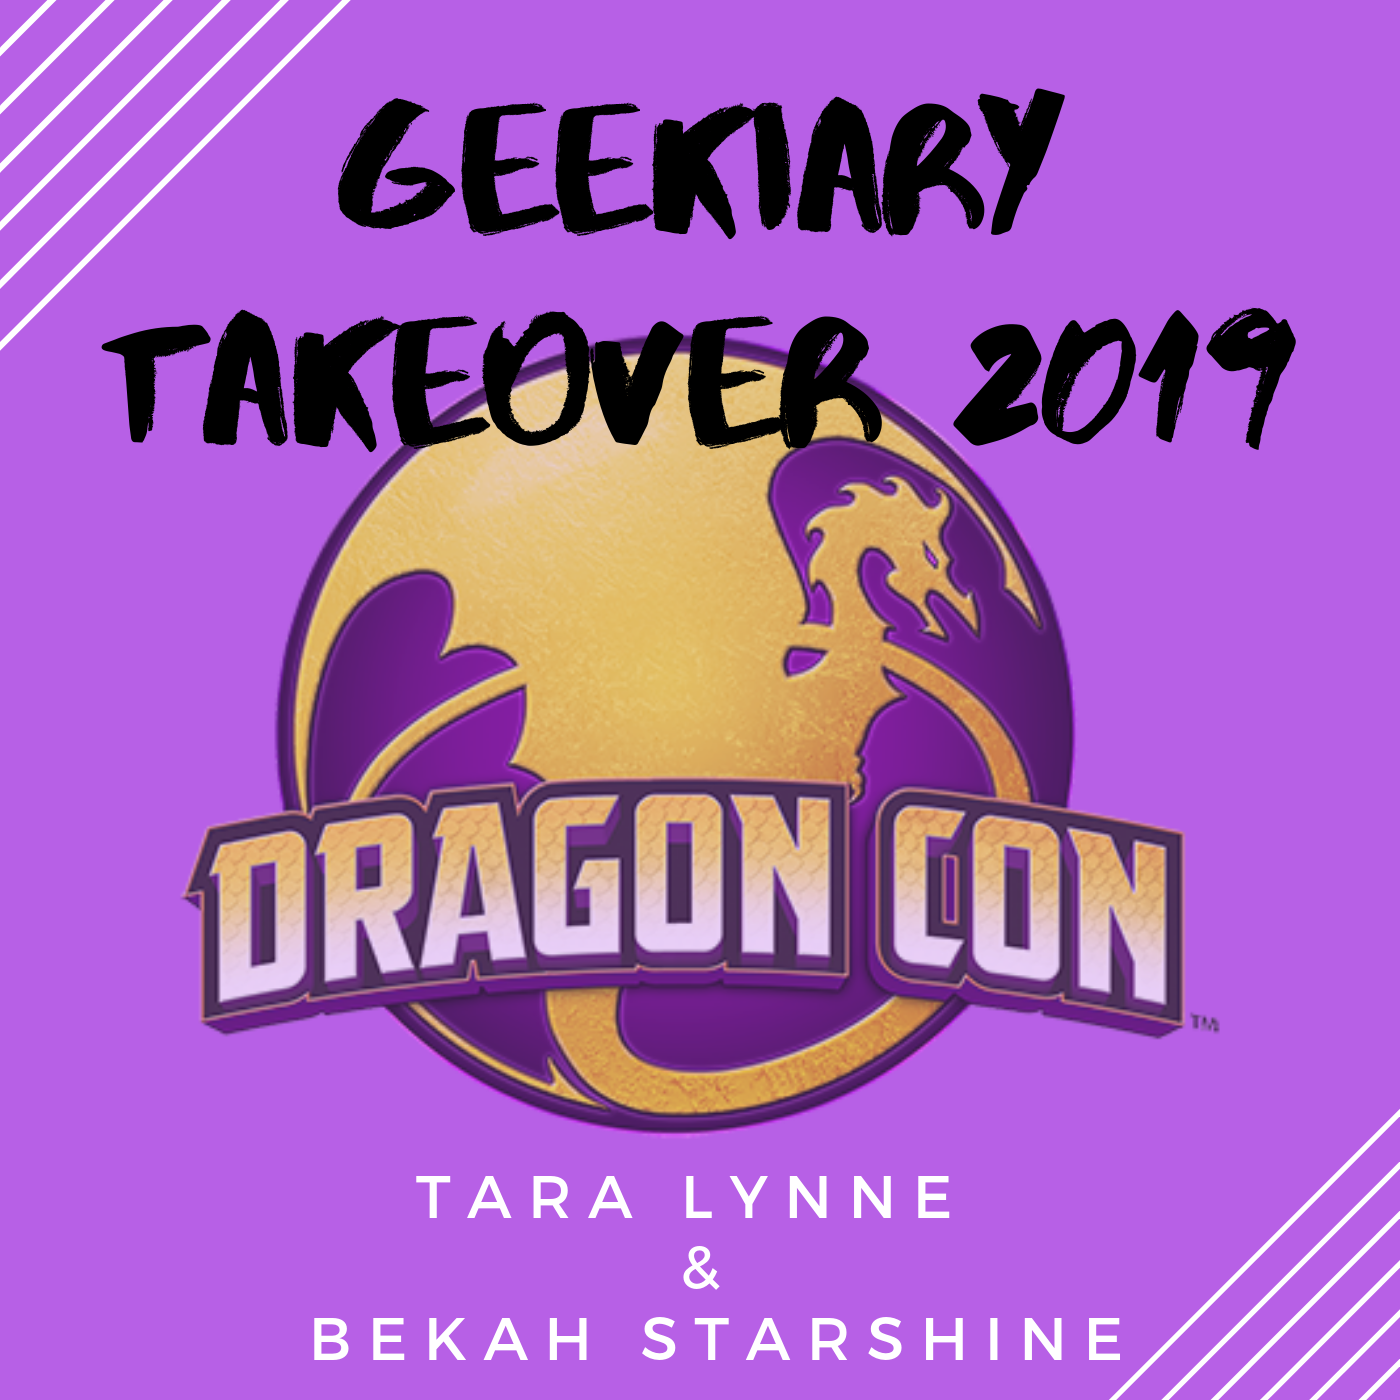 Dragon Con 2019: The Geekiary Takeover - The Geekiary